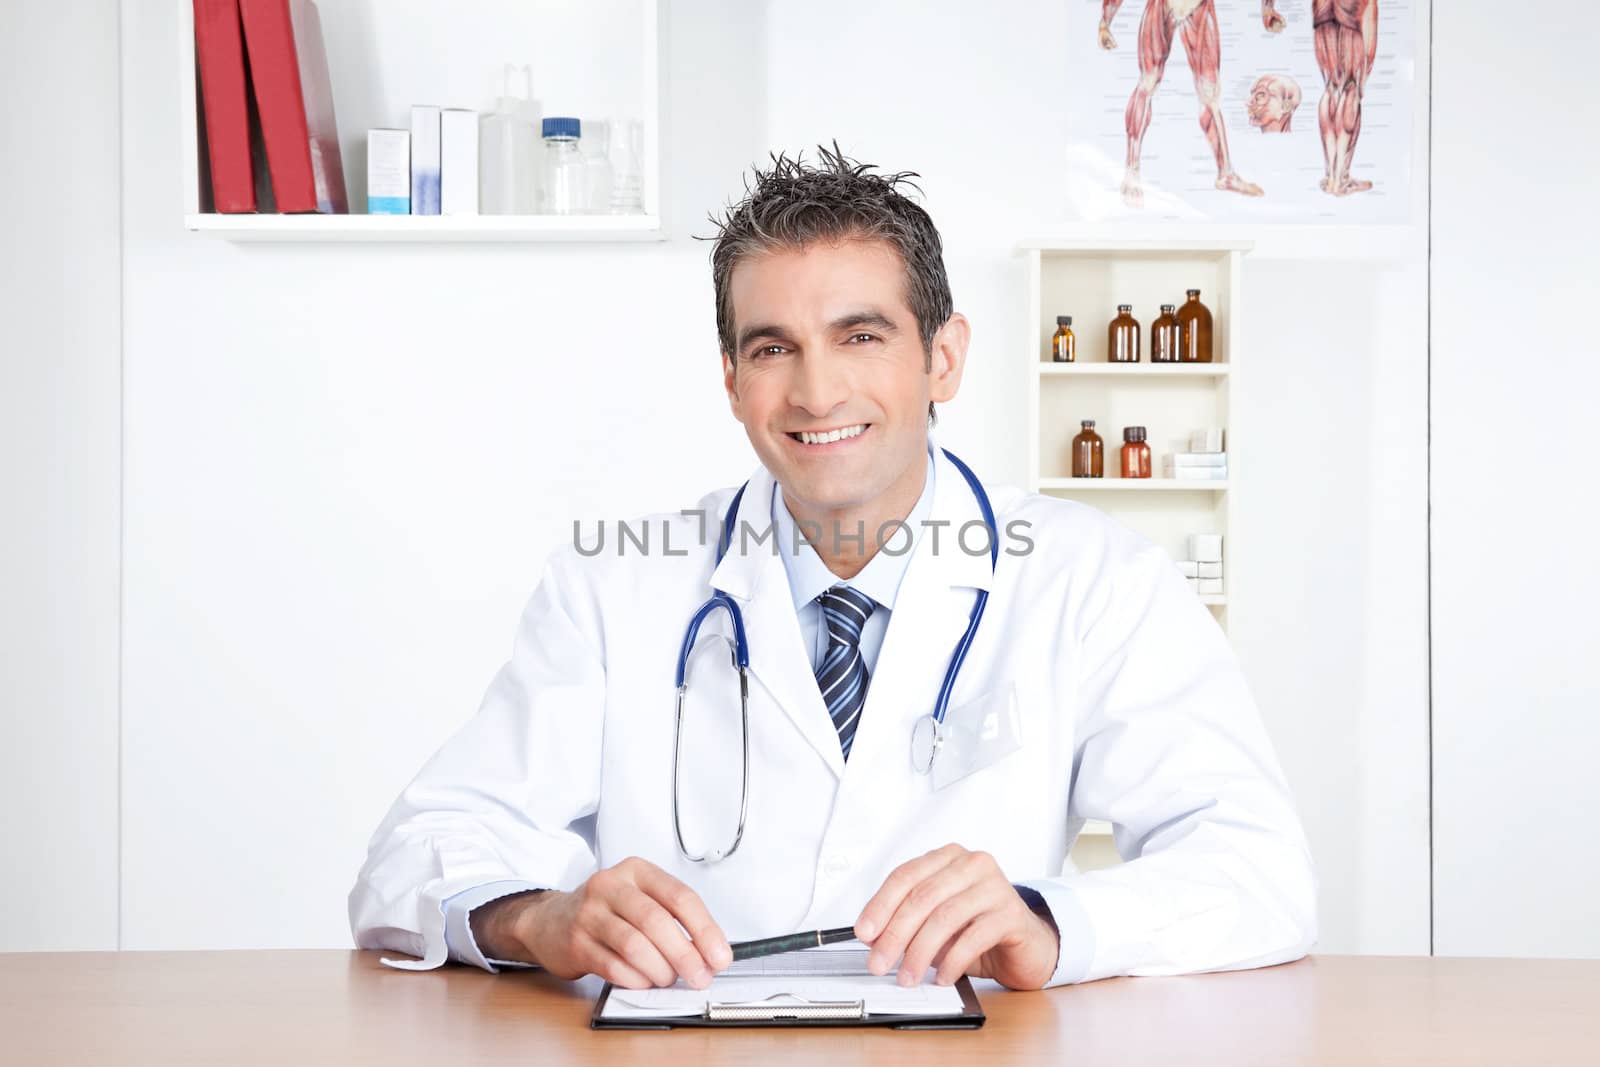 Male doctor sitting at desk with clipboard and pen.